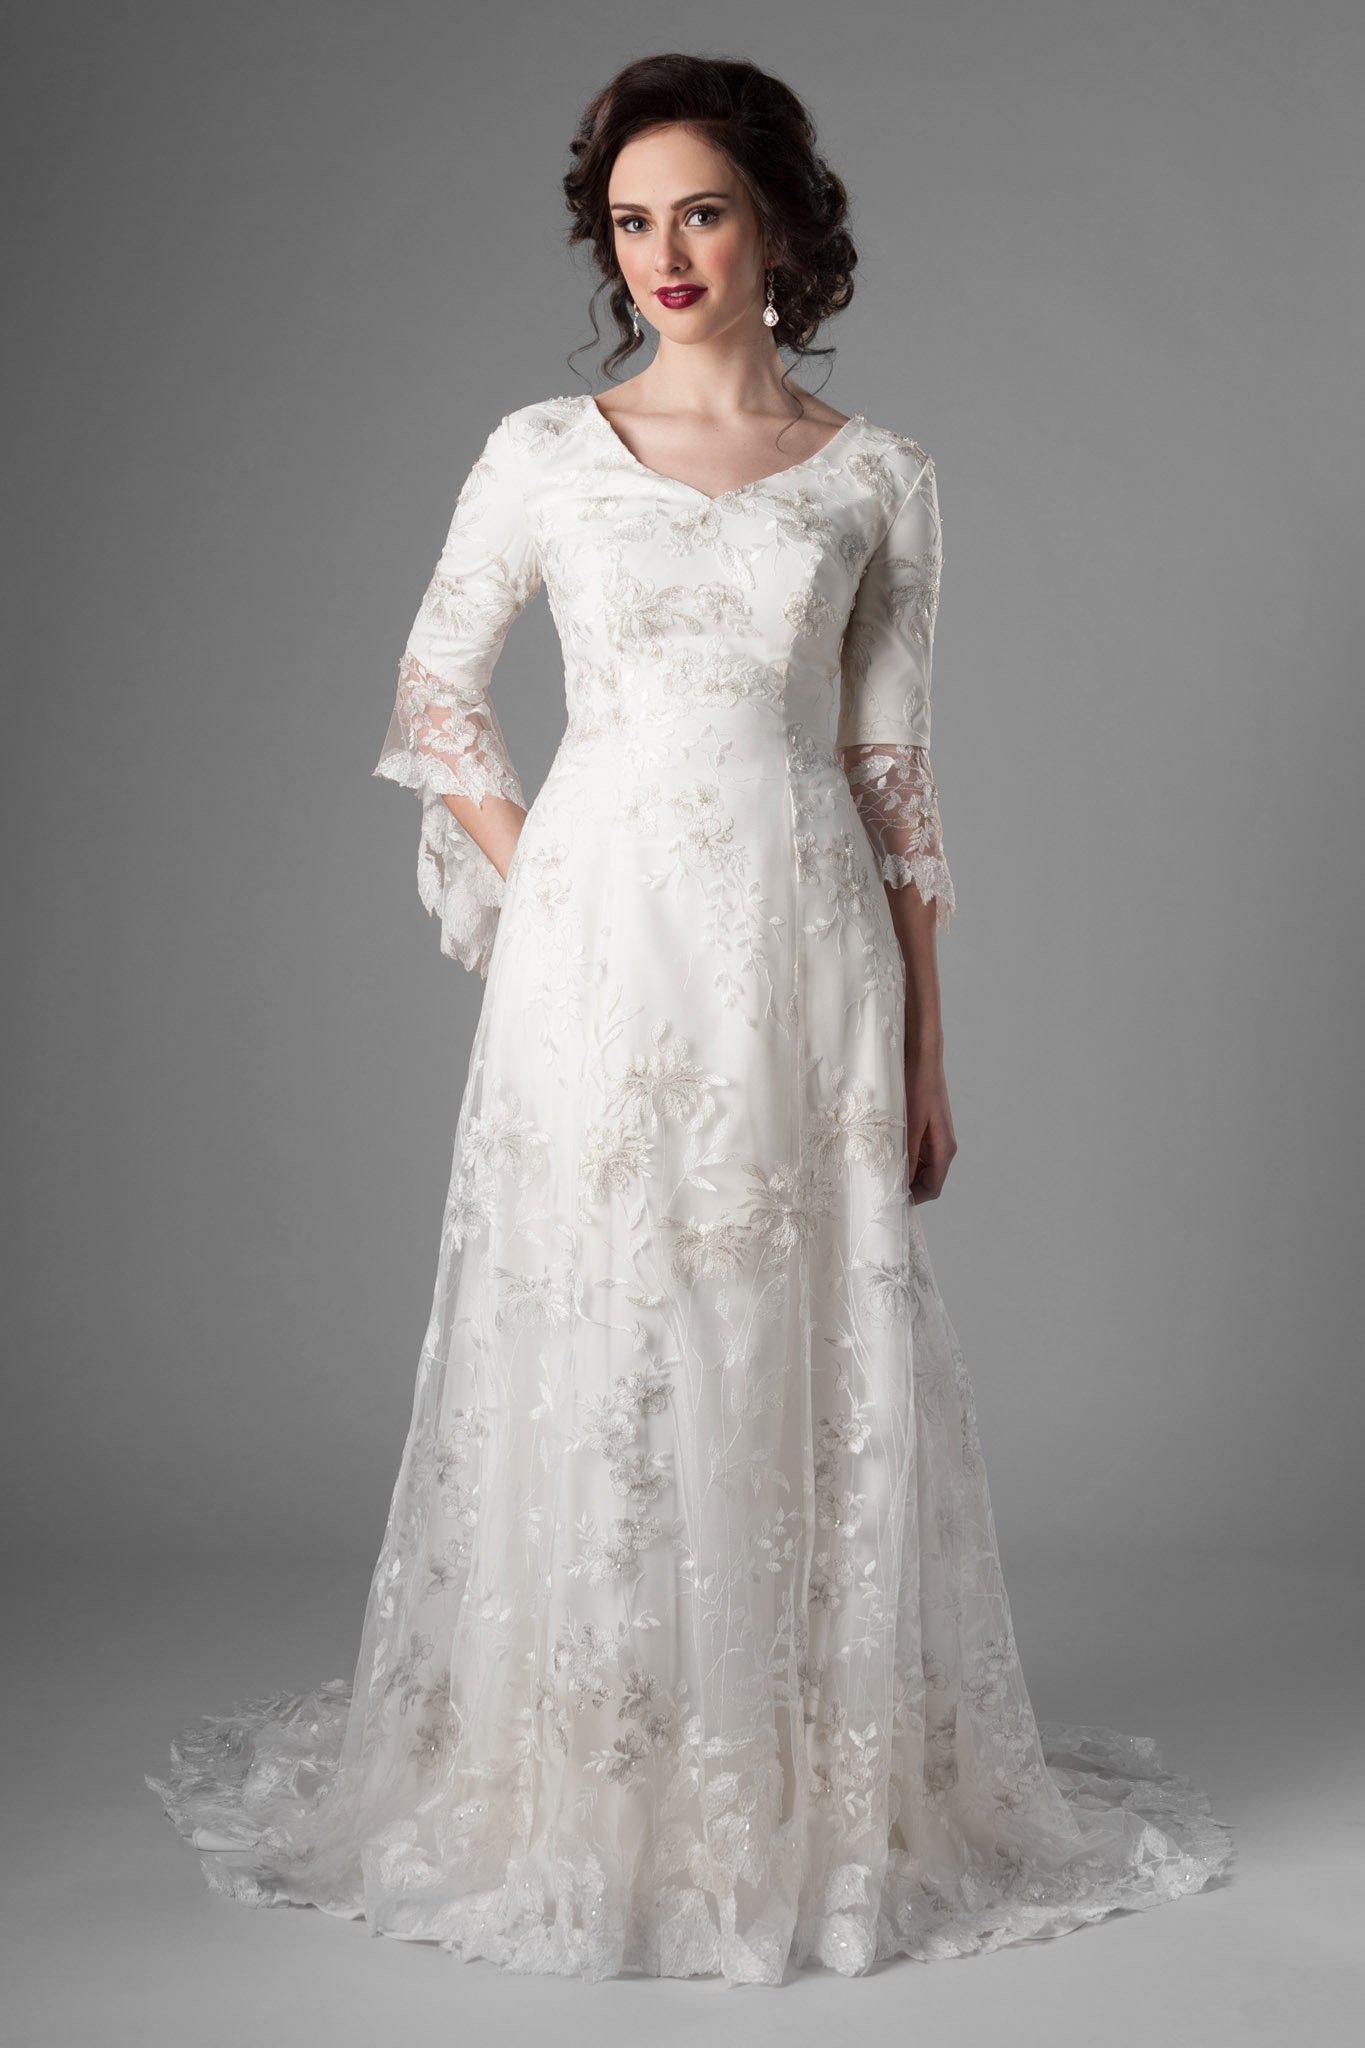 Fabulous florals with feminine shape modest wedding gown, style Rivendell, is part of the Wedding Collection of LatterDayBride, a Utah Wedding Shop. 